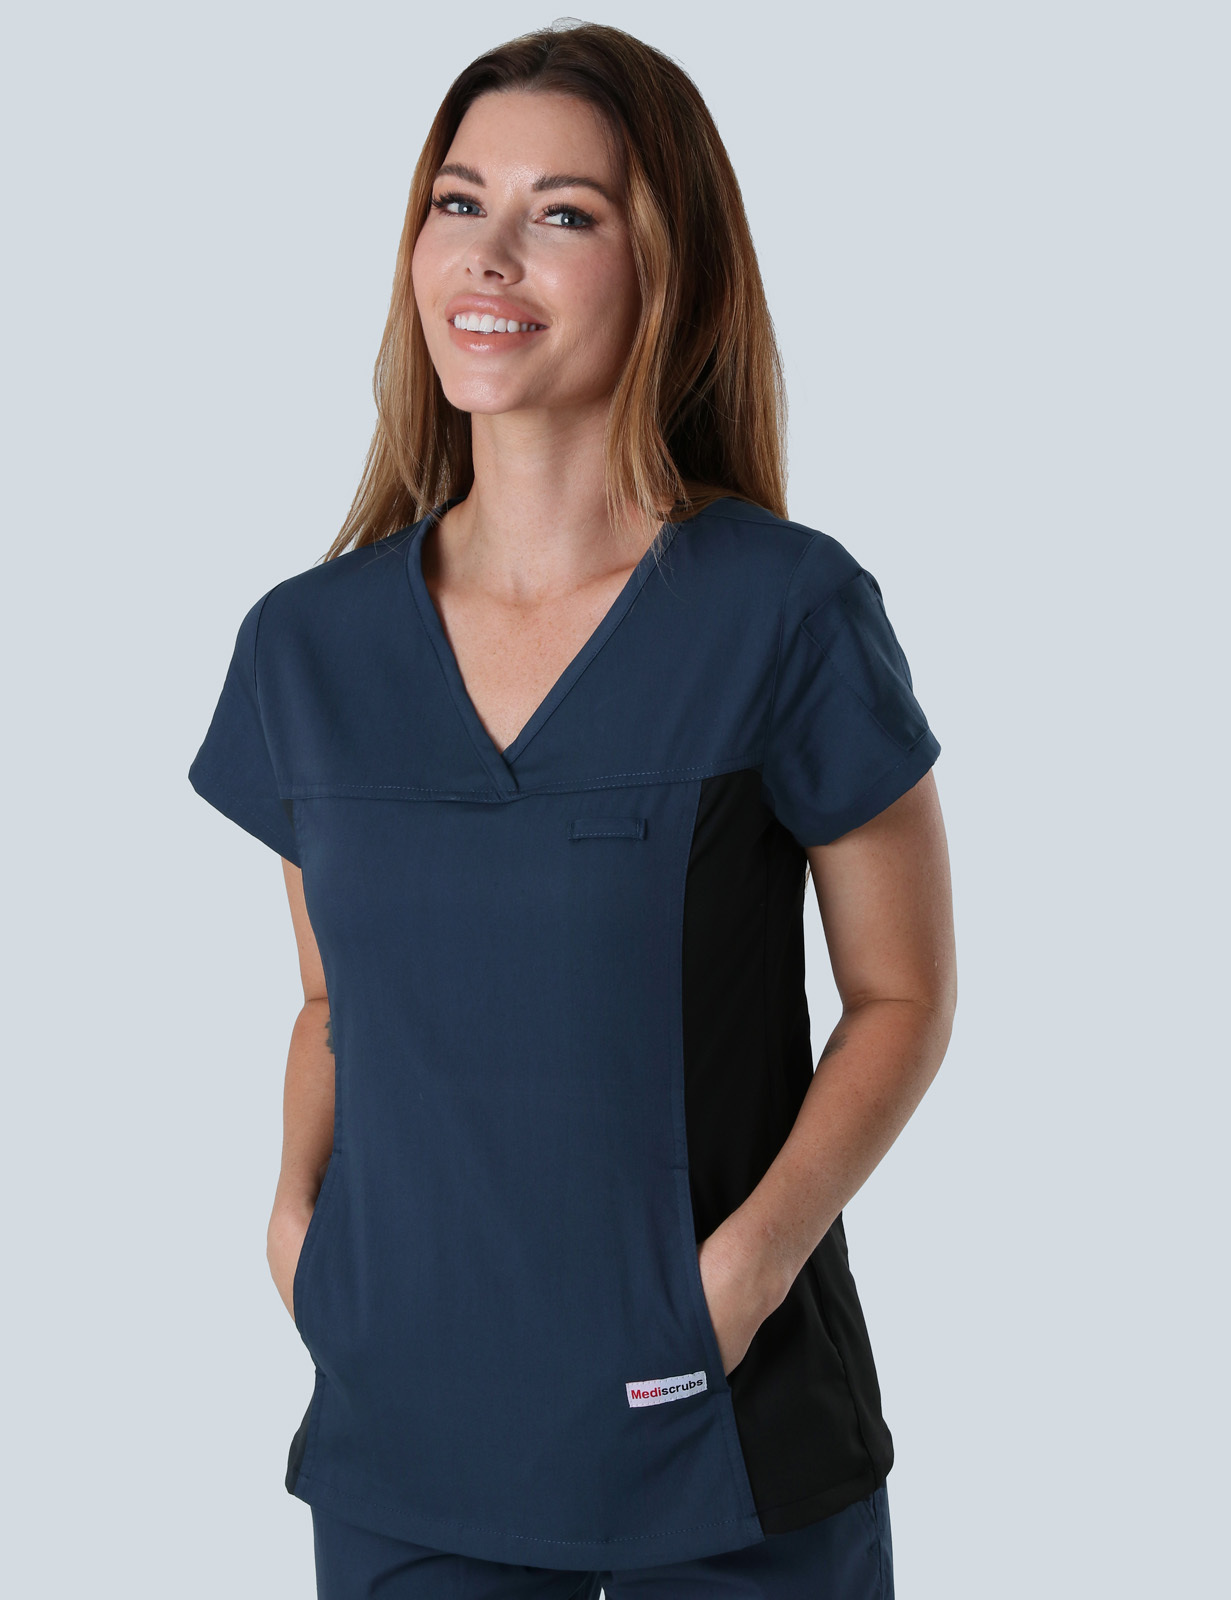 Redland Hospital - Medical Imaging (Women's Fit Spandex Scrub Top and Cargo Pants in Navy incl Logos)